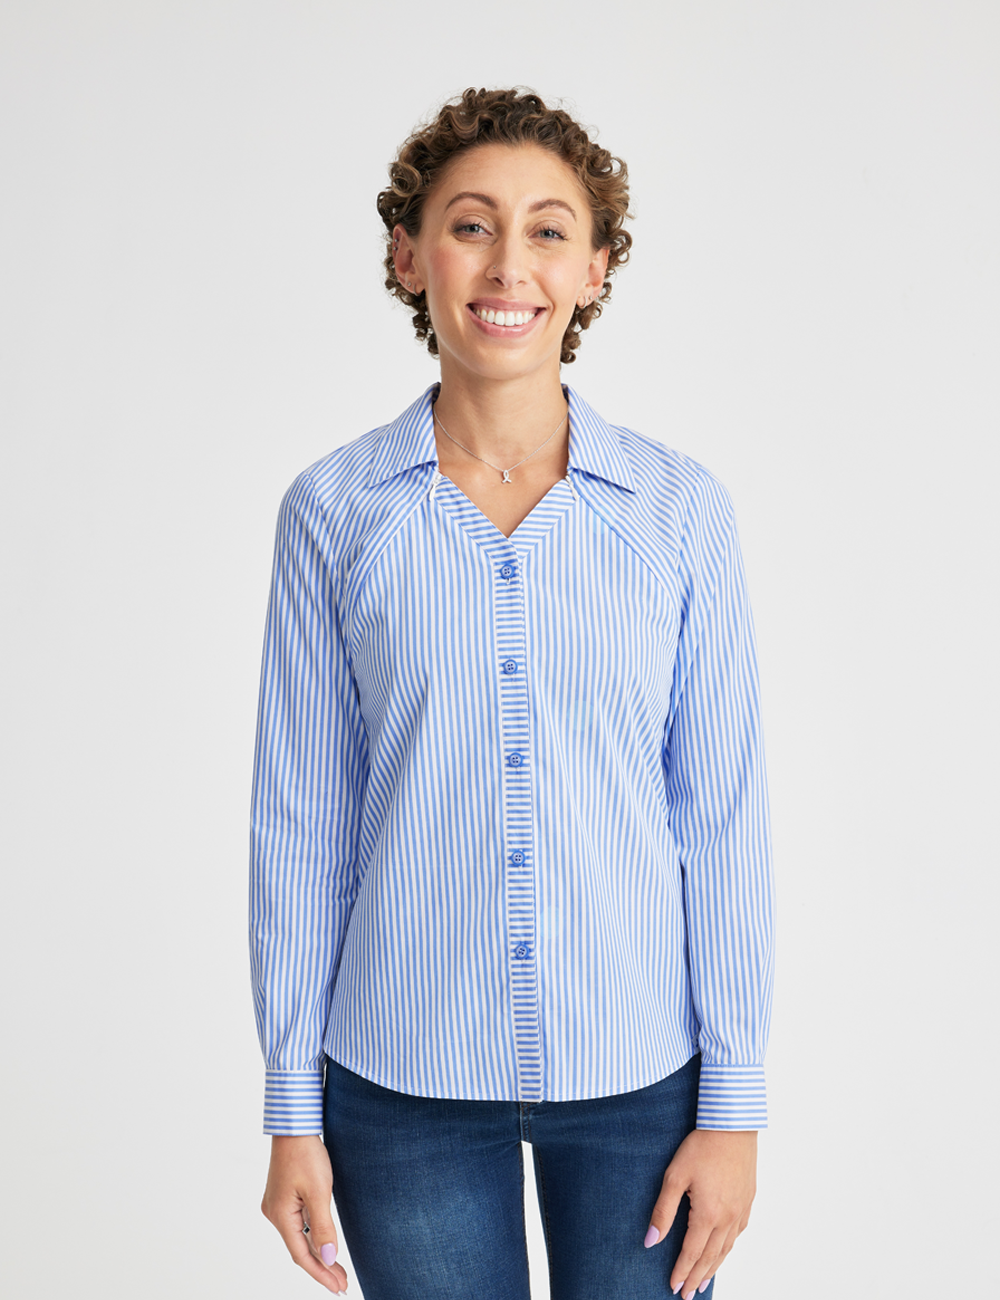 Womens Chest Port Access Support Bundle with Button Down